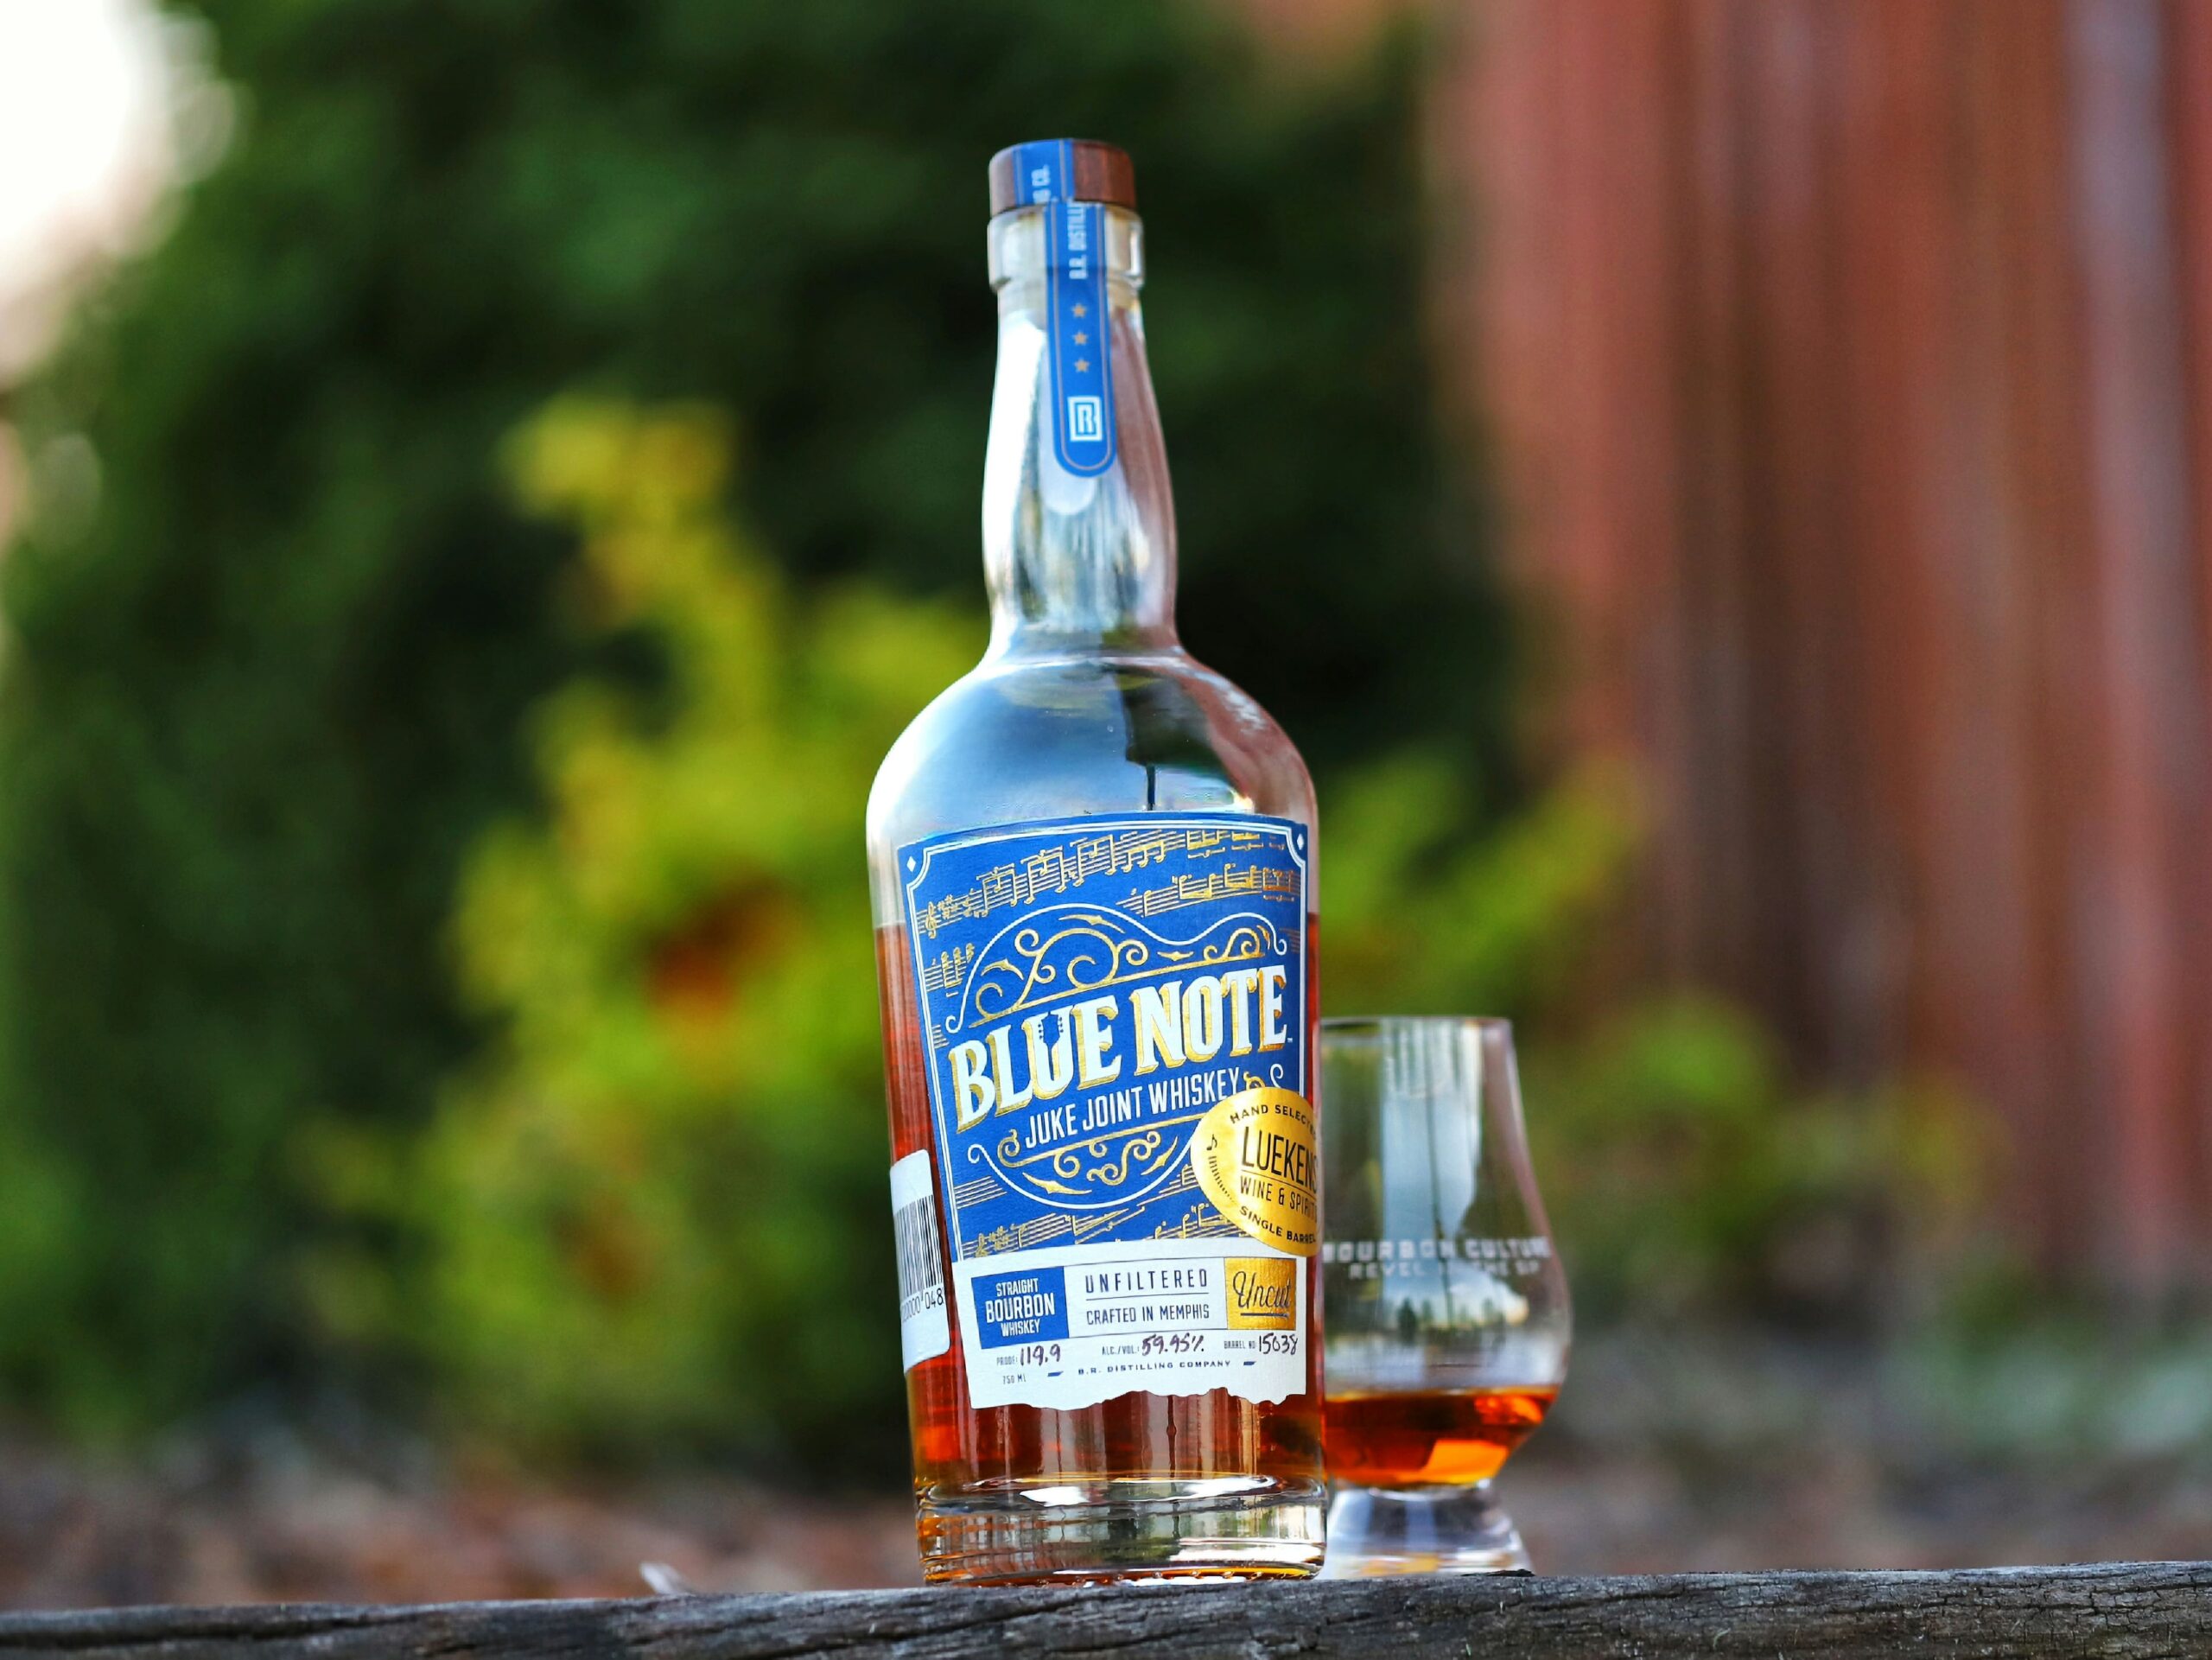 Blue Note Juke Joint Uncut Bourbon Whiskey Review